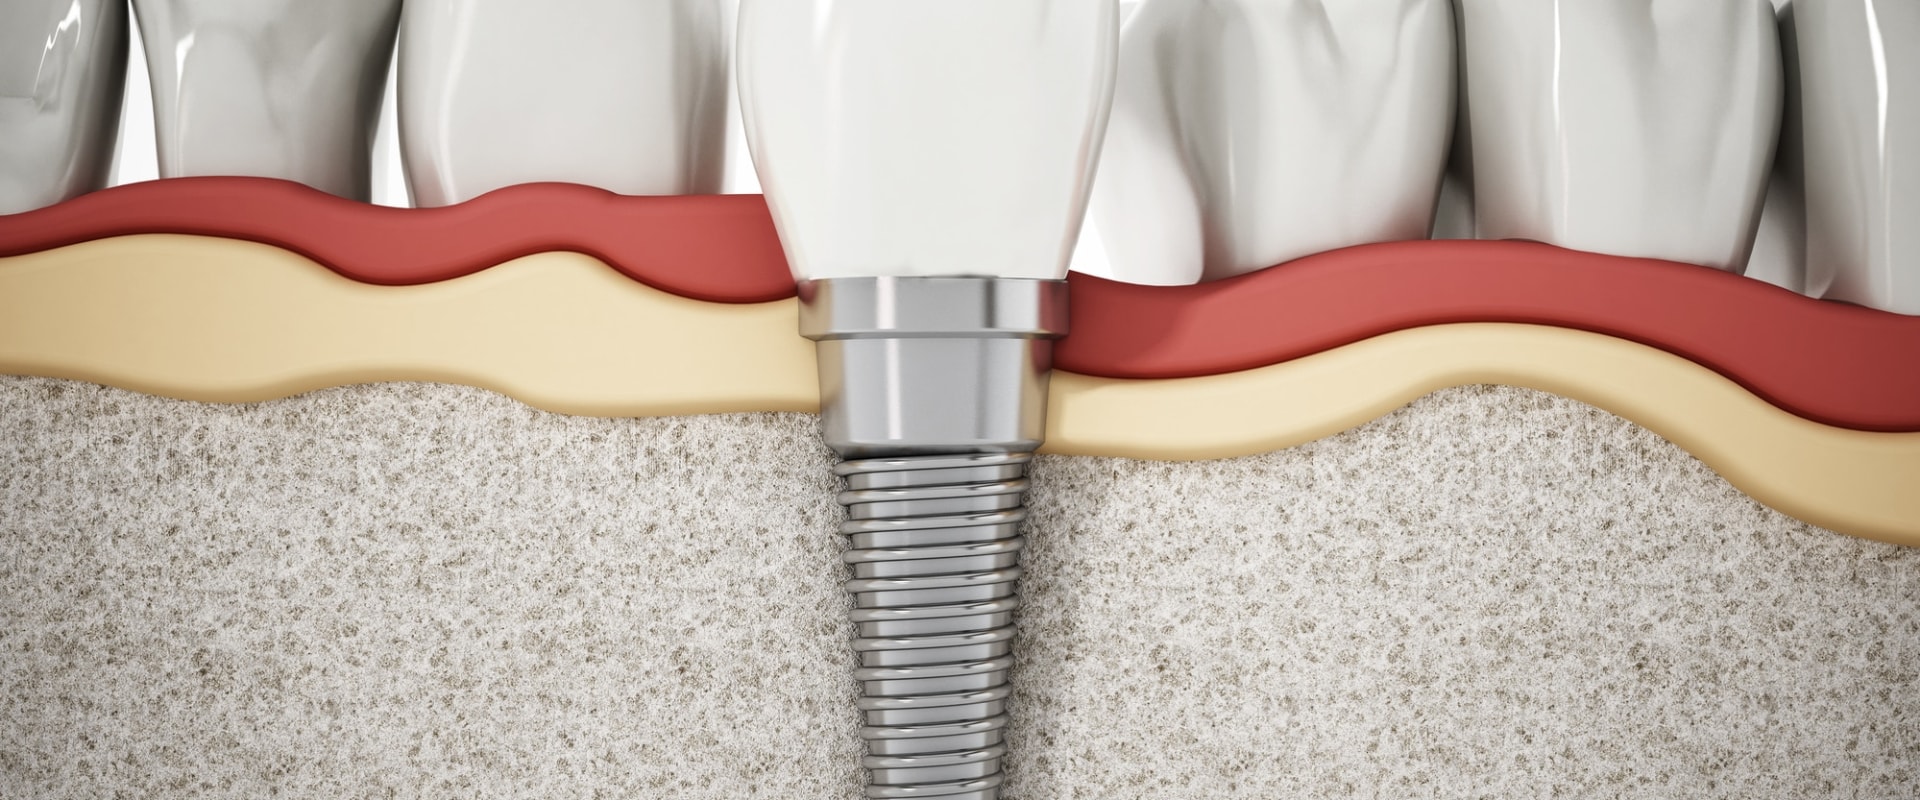 The Long-Term Success of Dental Implants: What You Need to Know